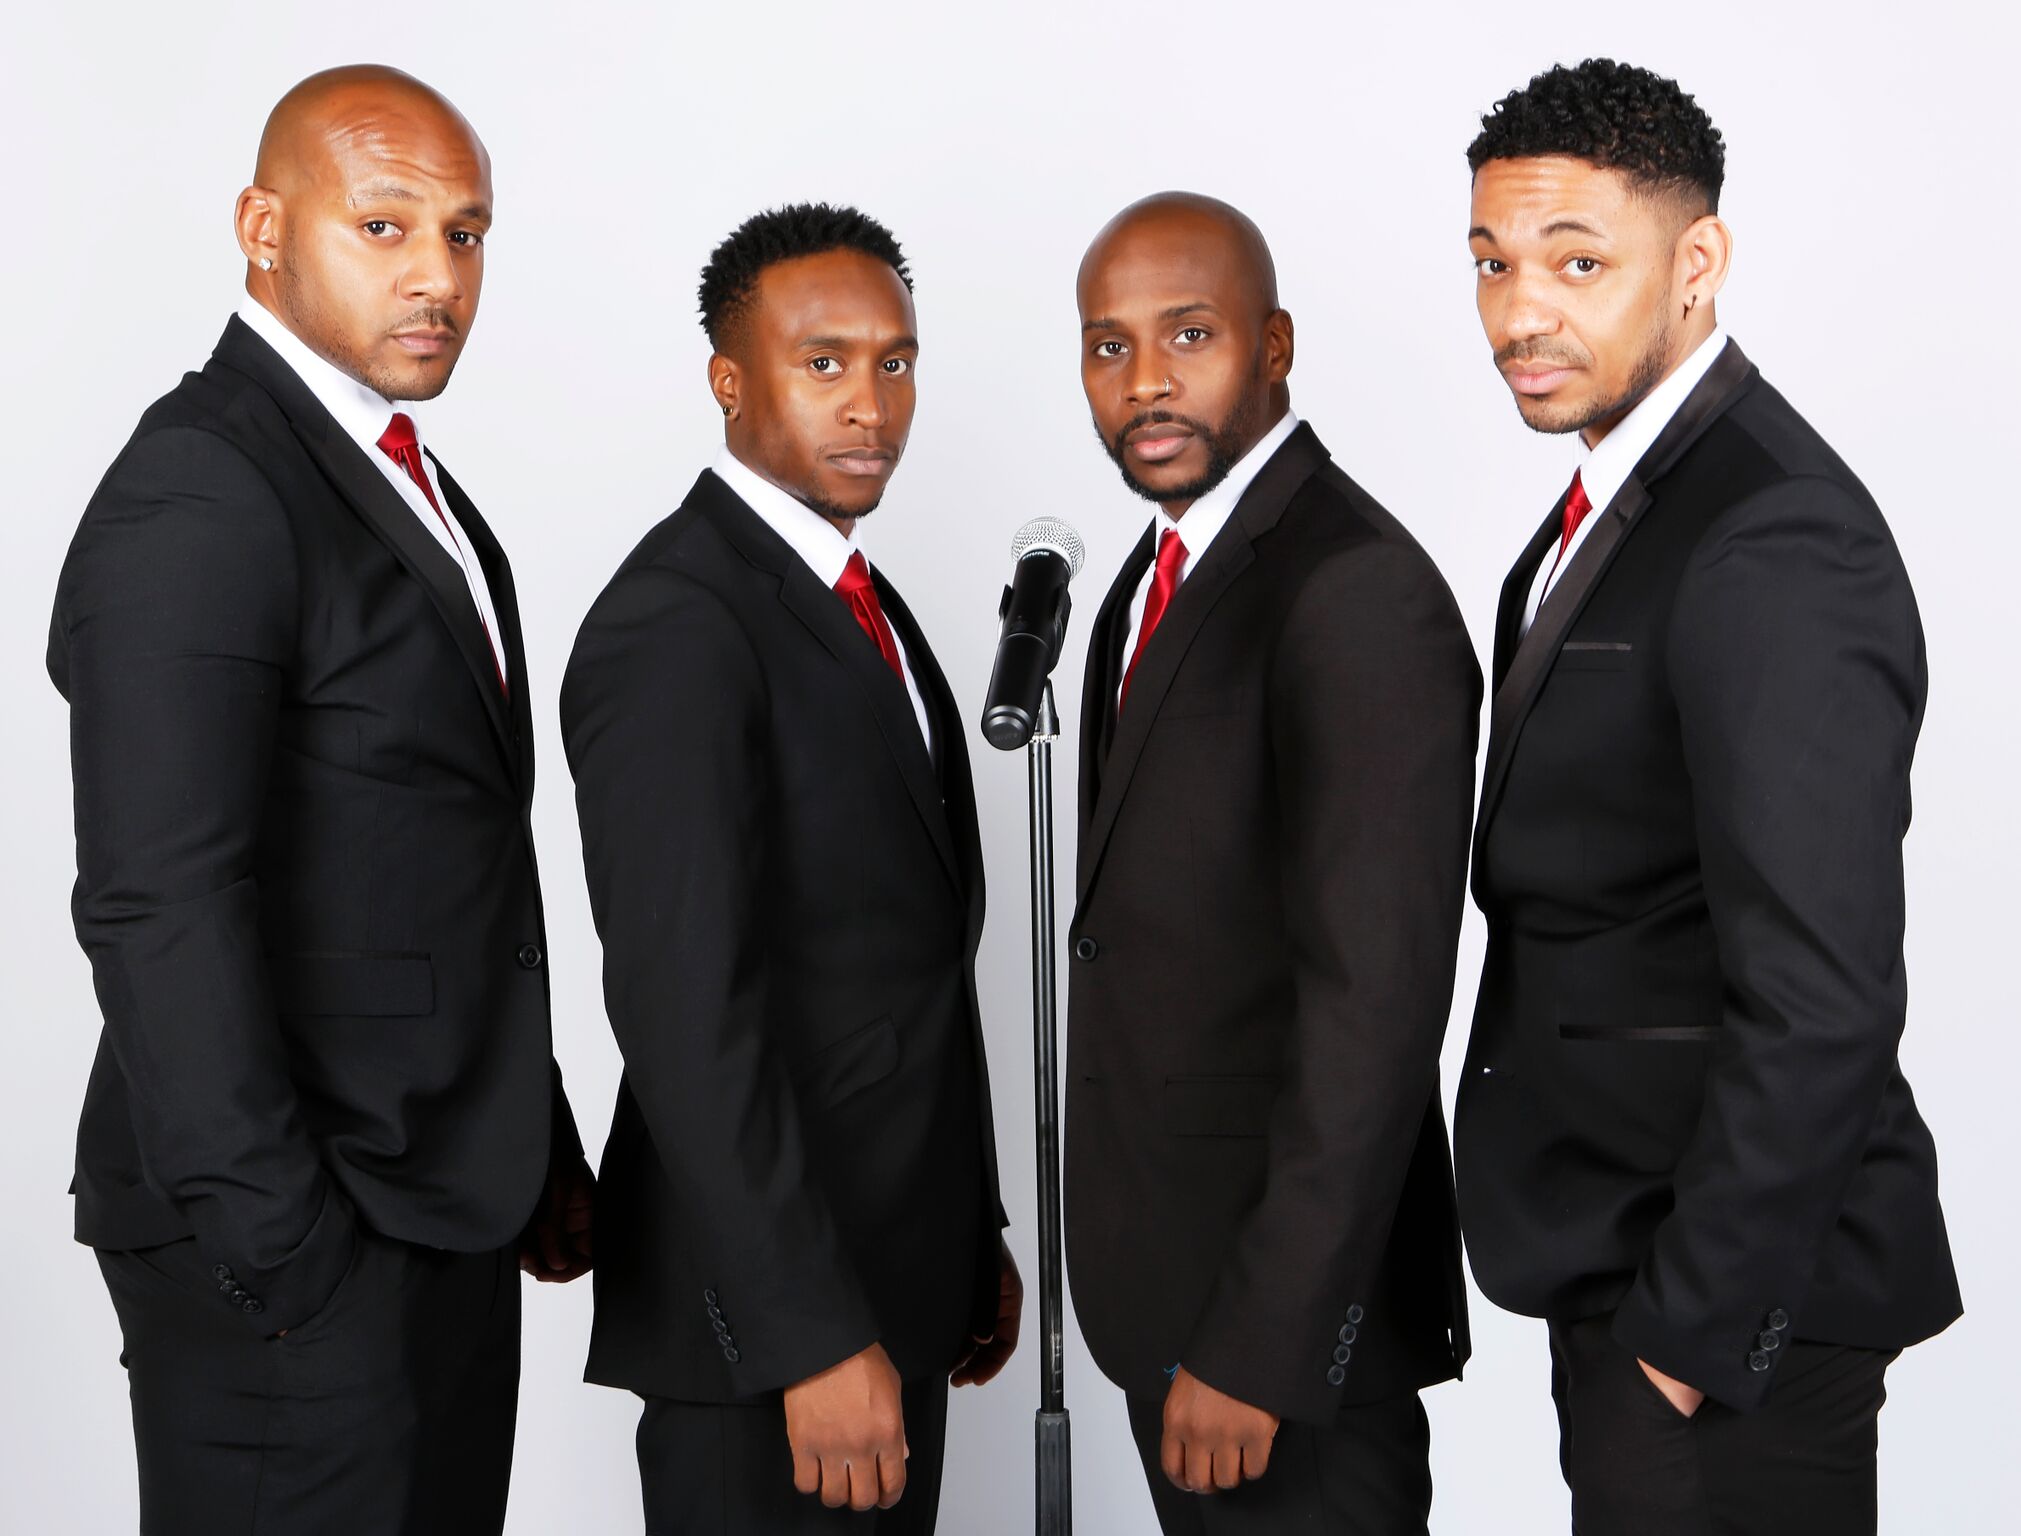 X-Factor and former Drifters star brings his band’s soul sound to charity ball organised by Wrexham businessman